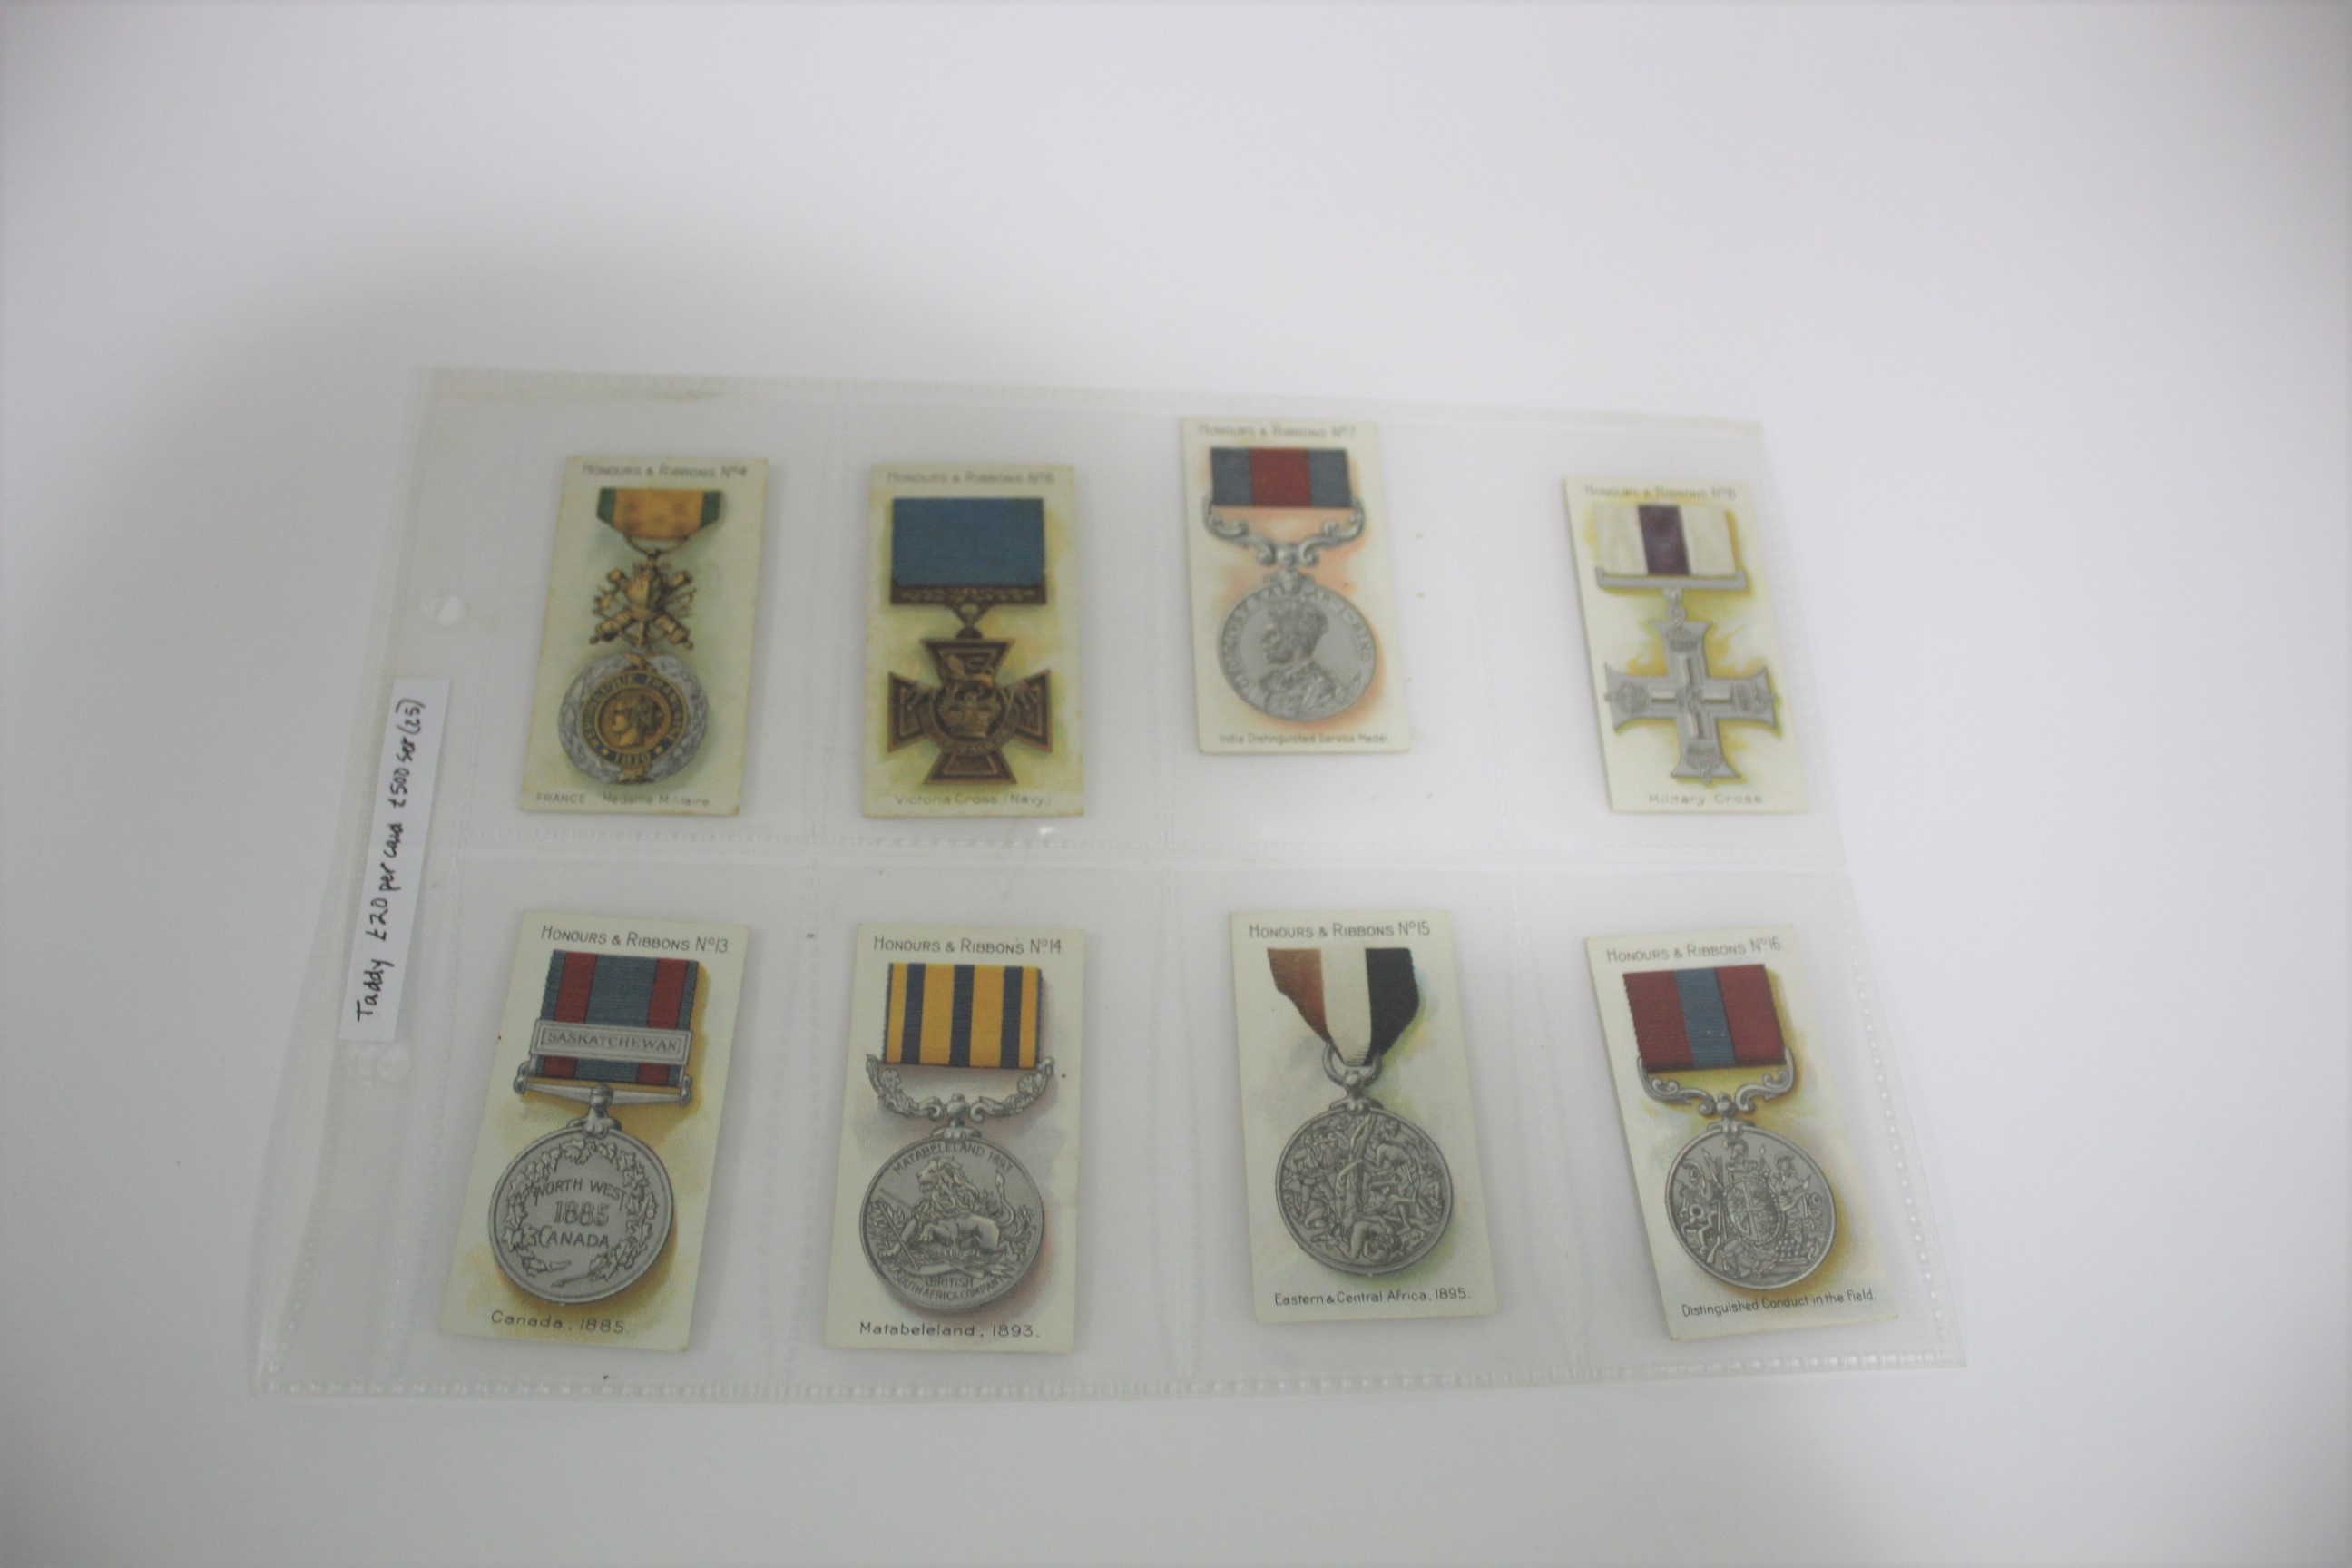 TADDY & CO CIGARETTE CARDS including 12 Honours & Ribbons cards (No 18, 19, 20, 6, 4, 6, 7, 8, 13,